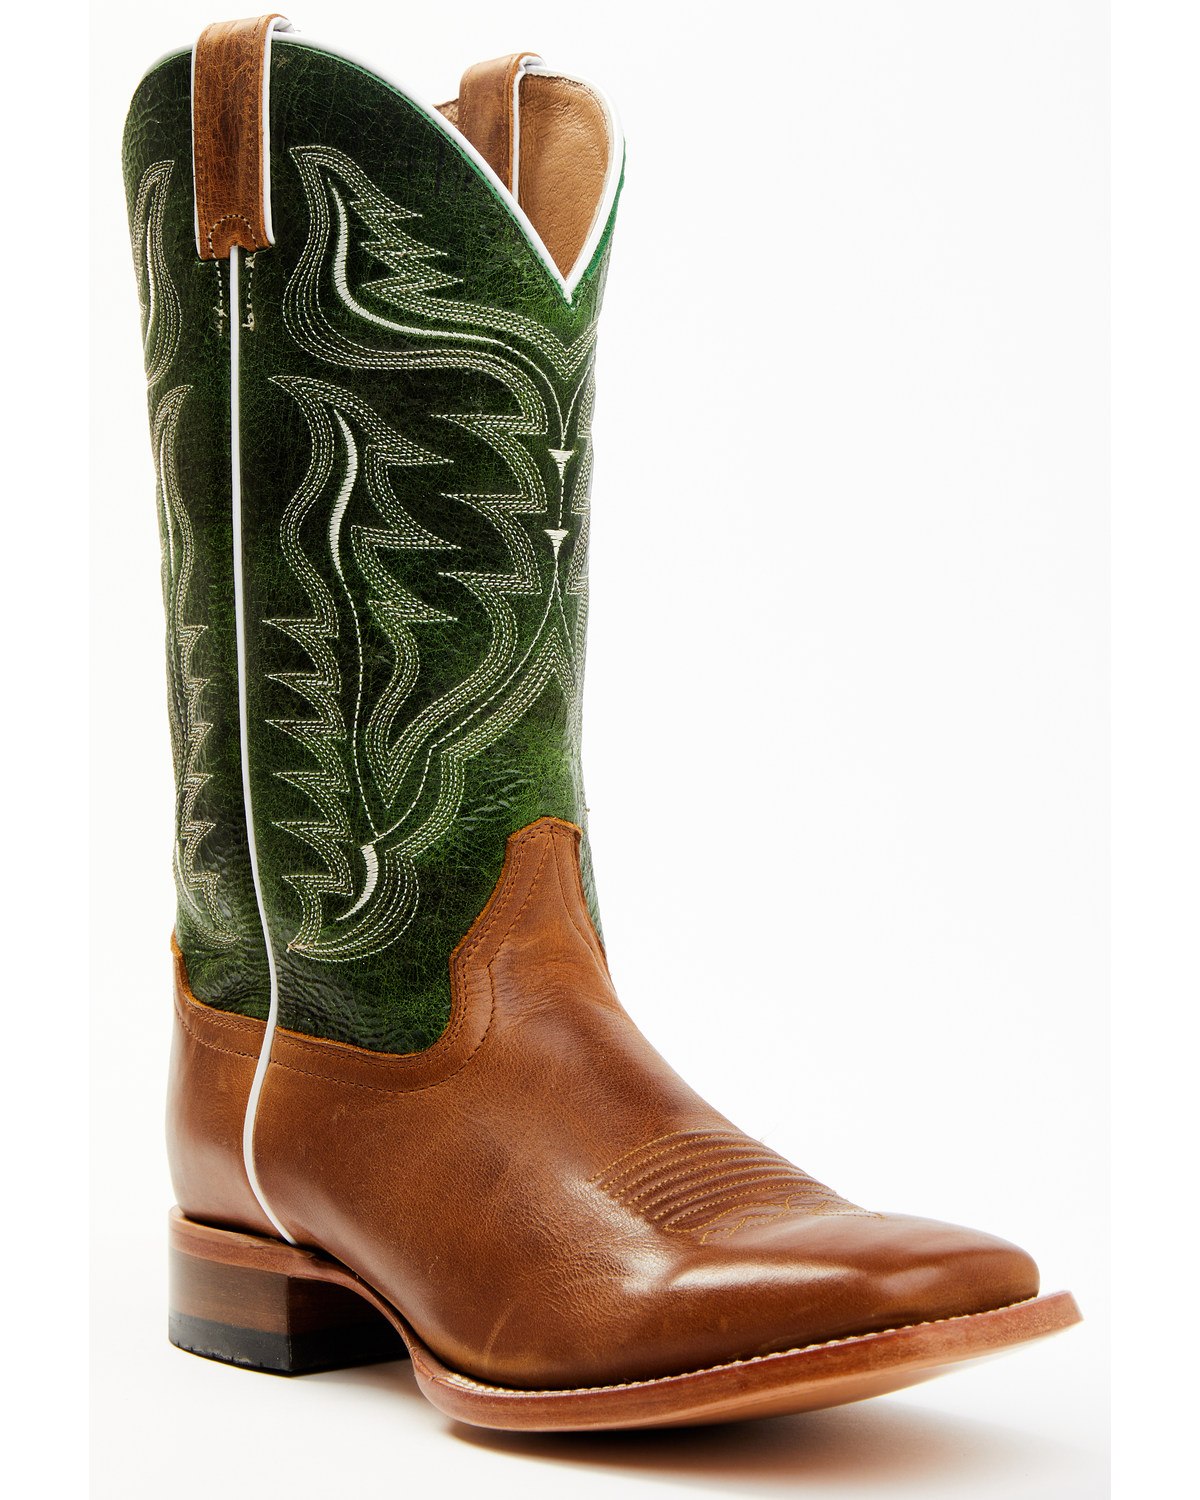 Cody James Men's Peridot Green Leather Western Boots - Broad Square Toe